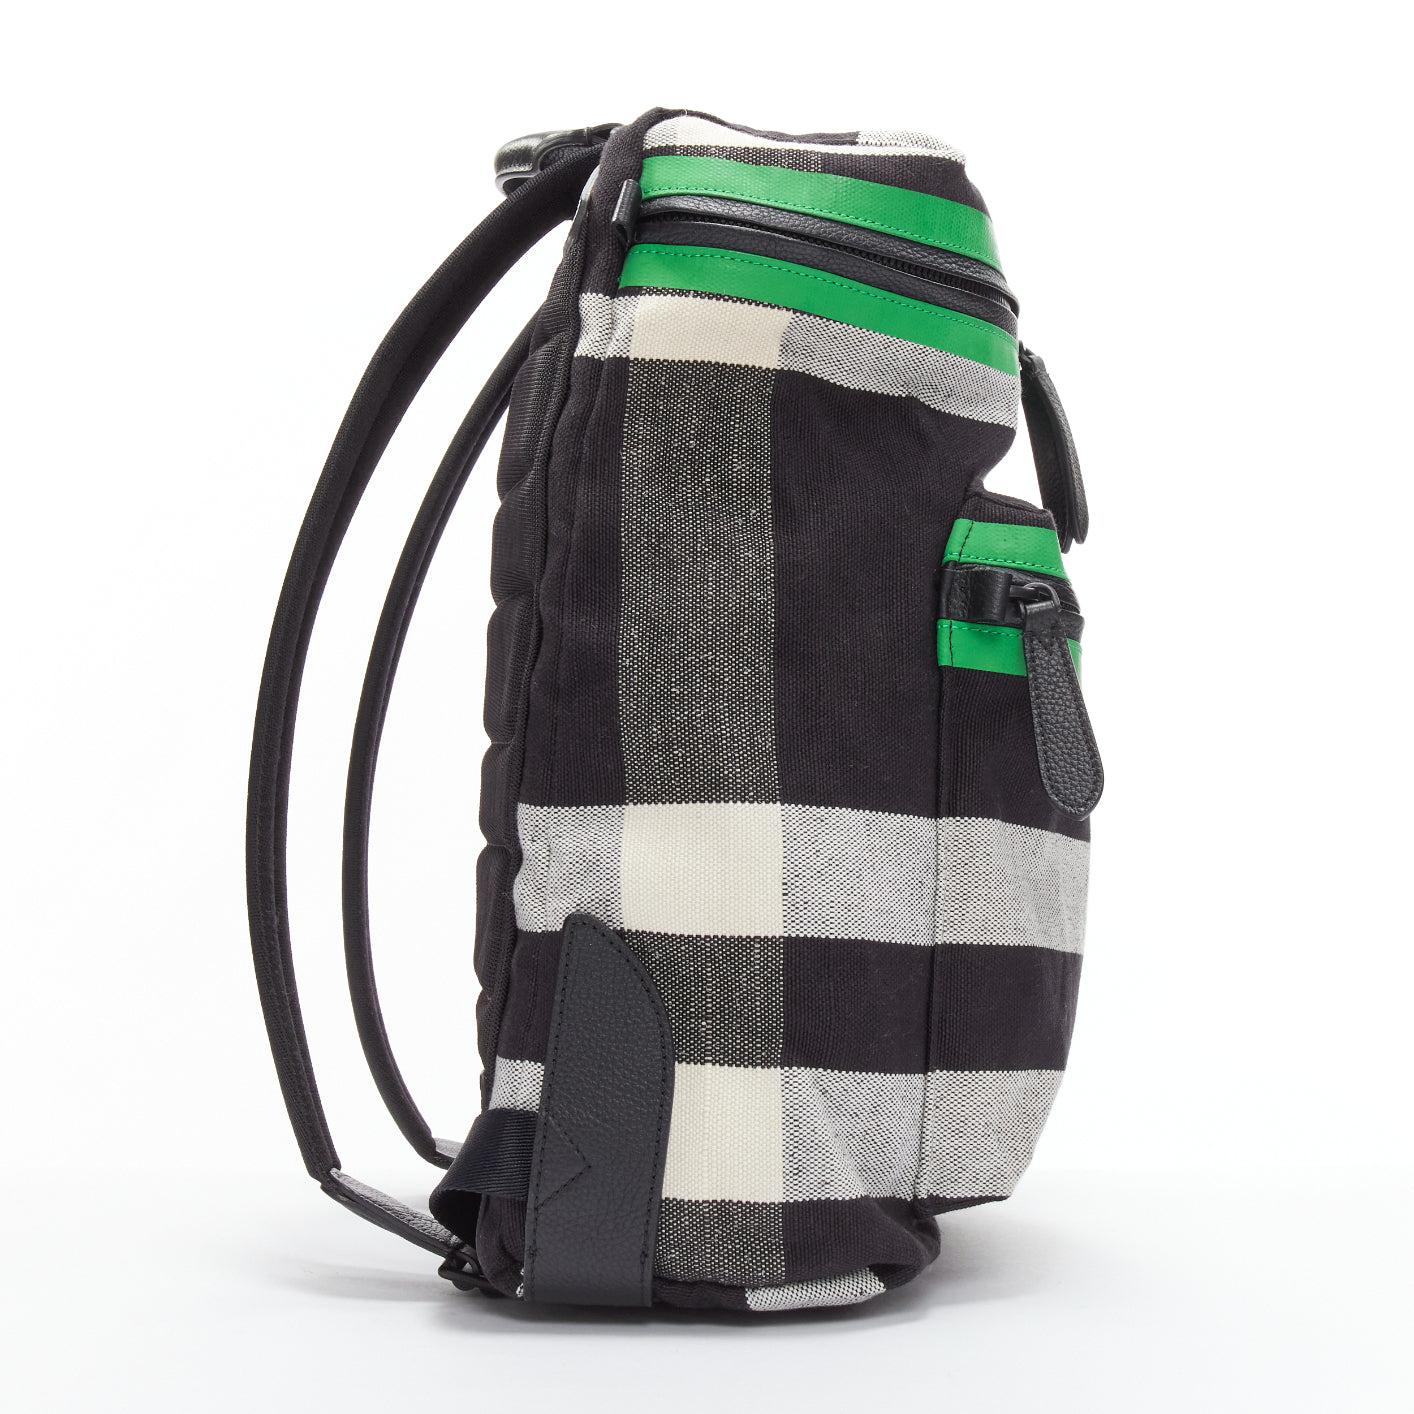 Black BURBERRY Donny House Check green black fabric leather trim backpack bag